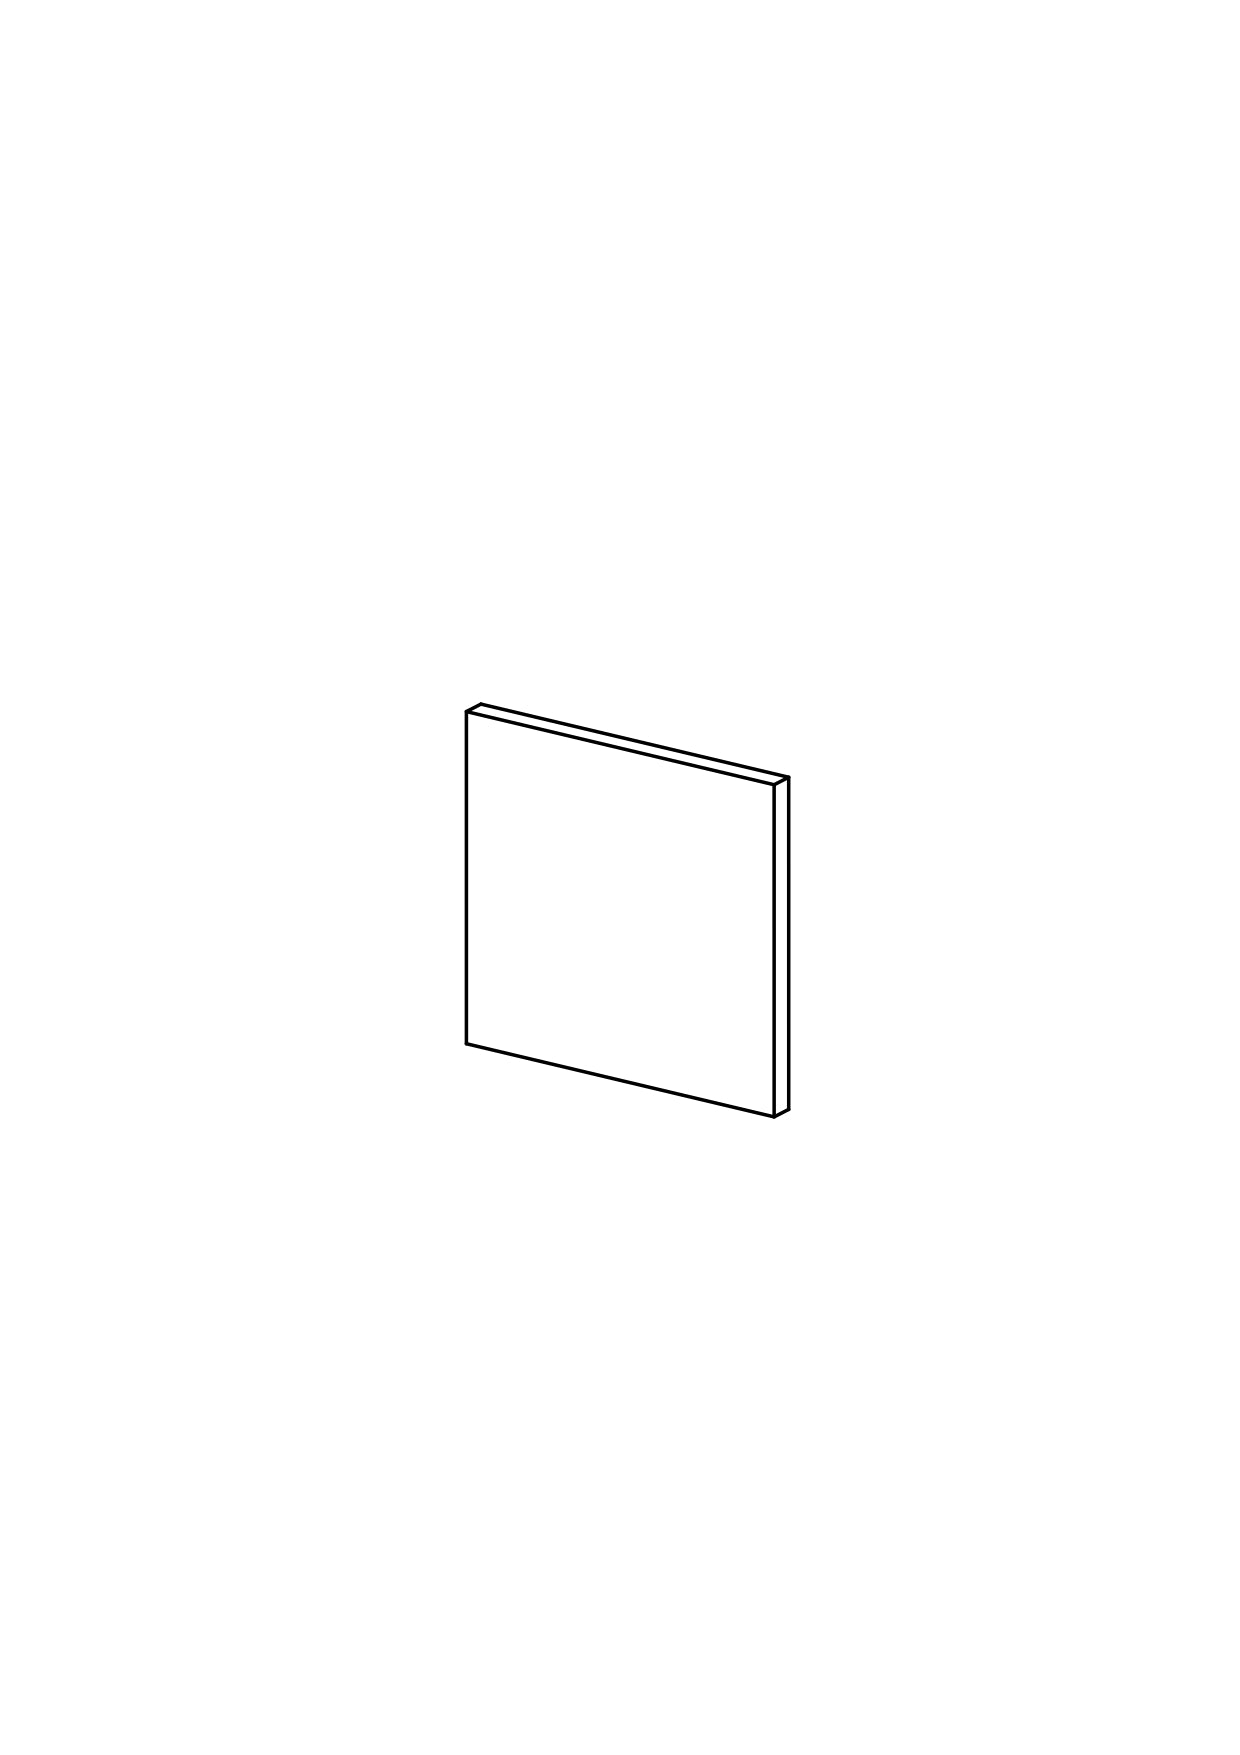 62x60 - Cover Panel - Plain - Unpainted (Raw) - METOD